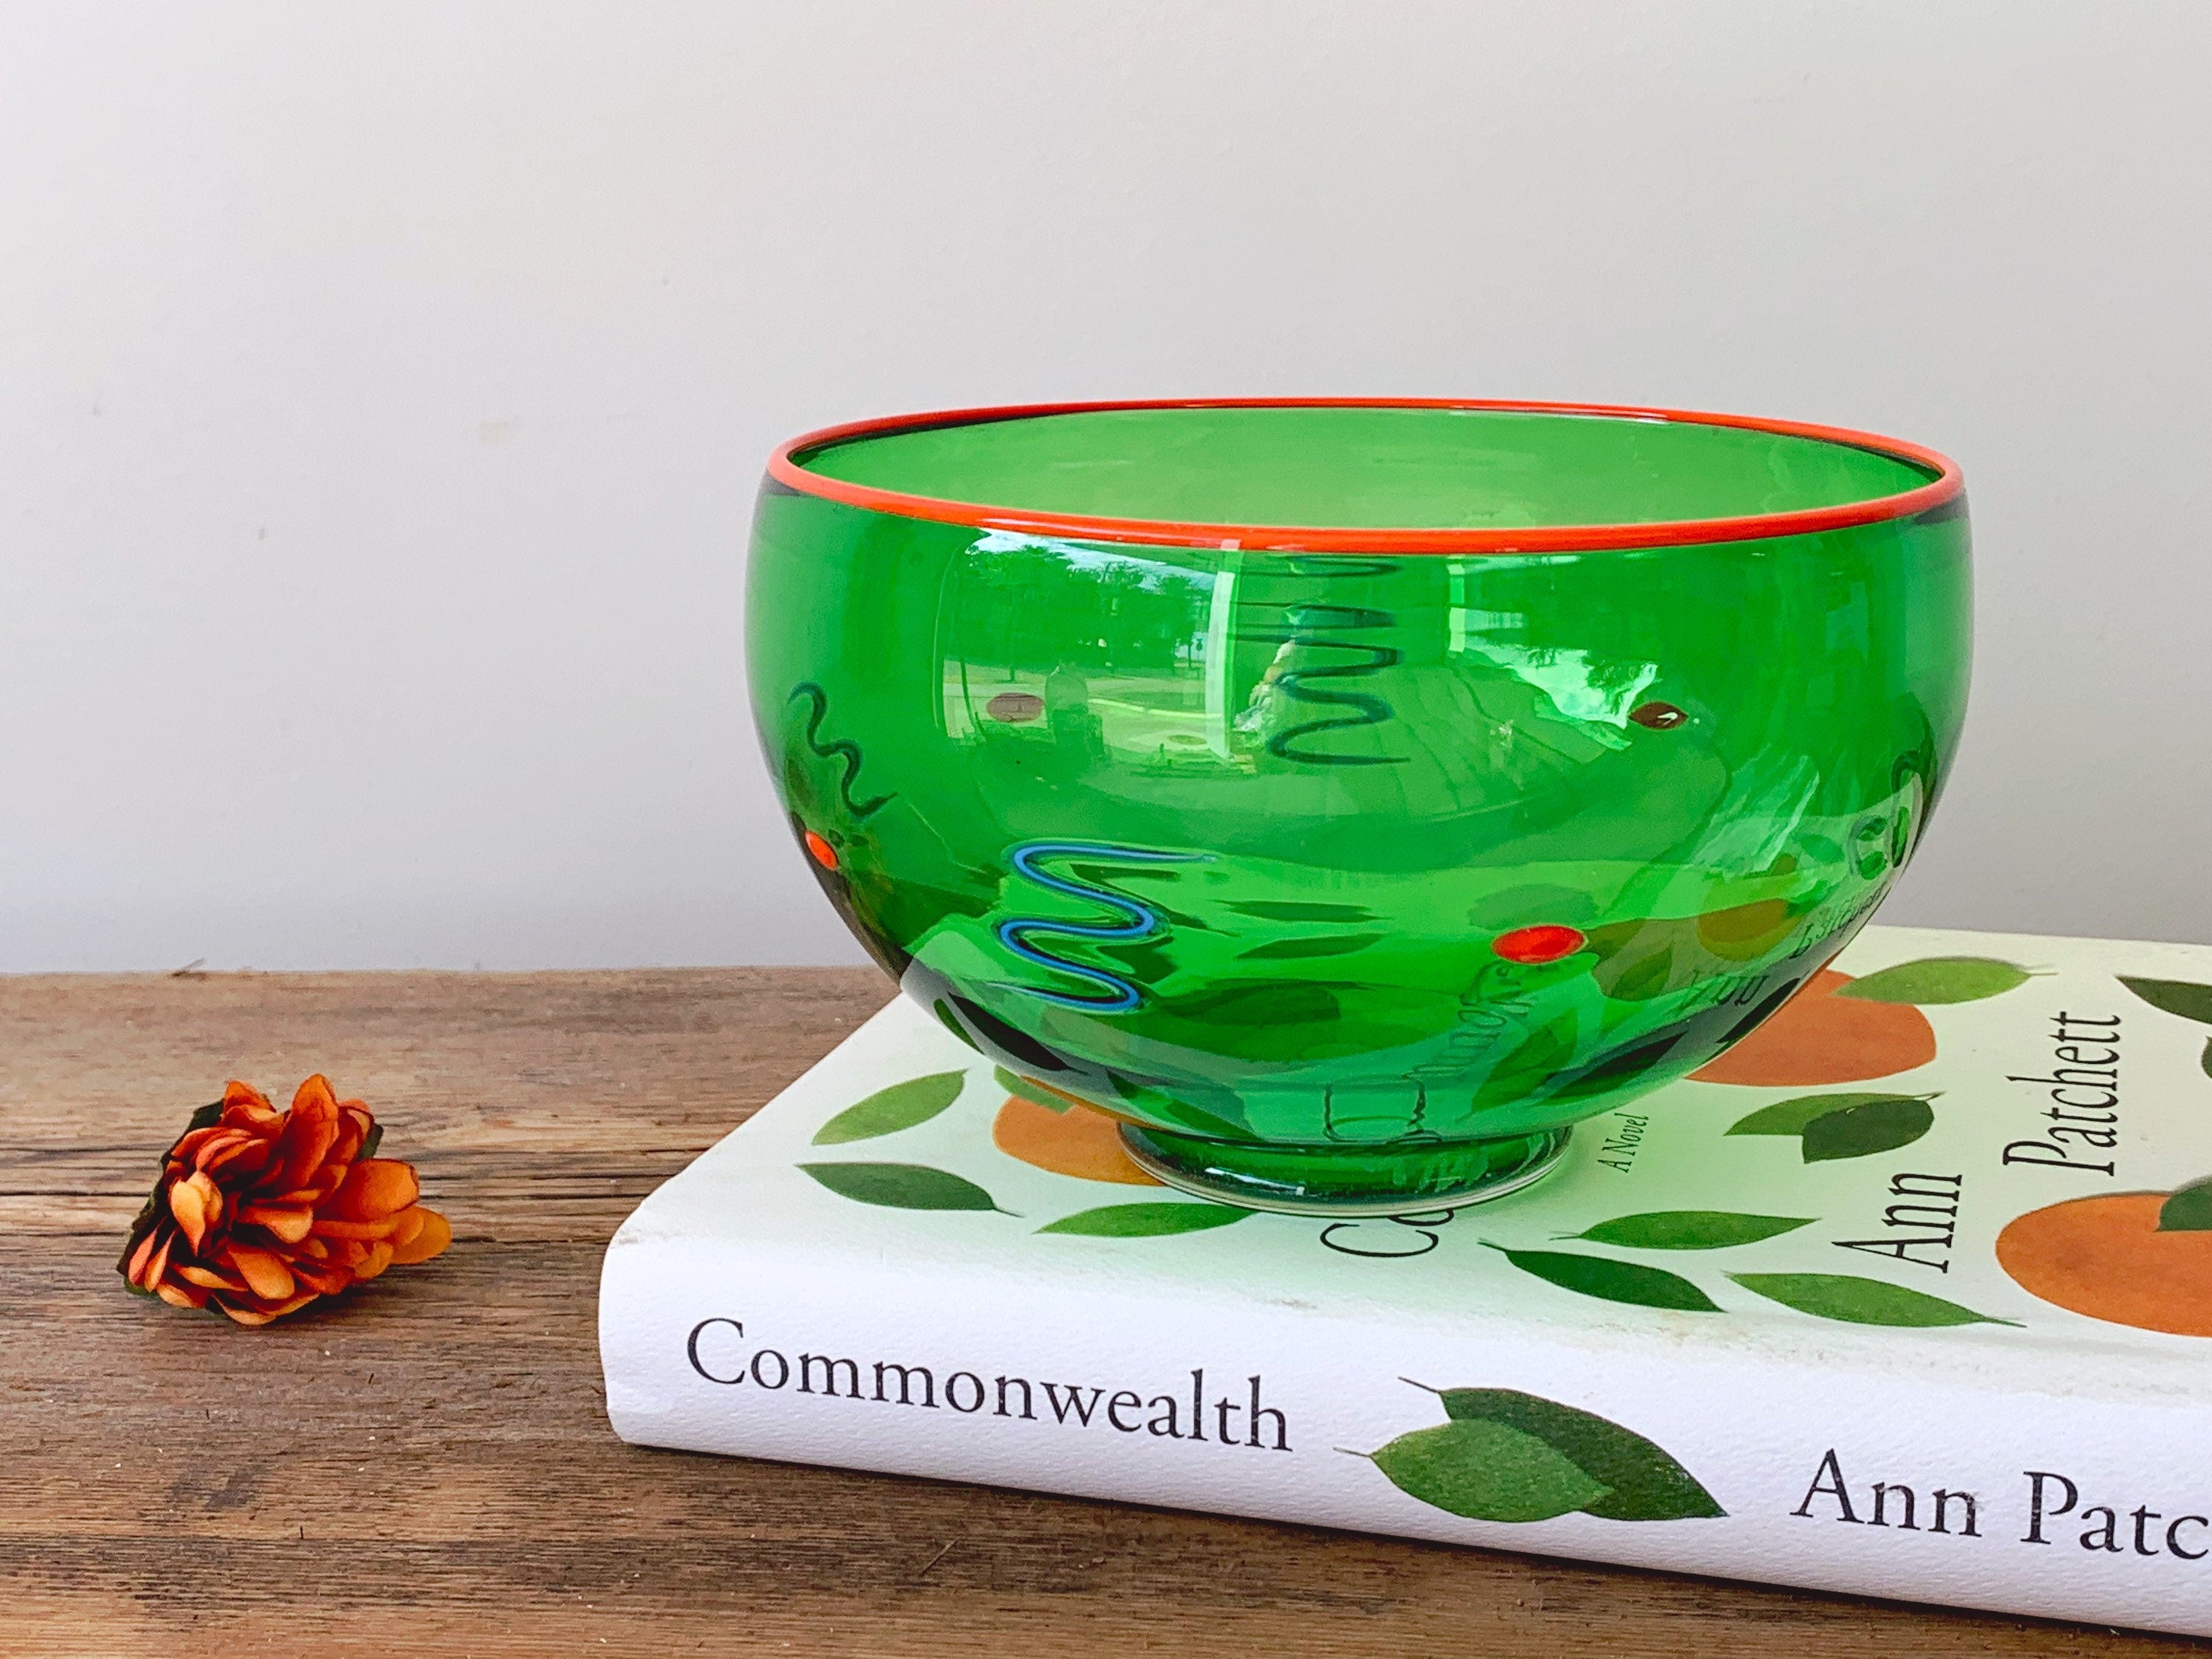 Vintage Antonio Garcia Studio Art Glass Bowl in Green with Orange Rim, Dots and ZigZags | Serving Bowl Candy Bowl Decorative Art